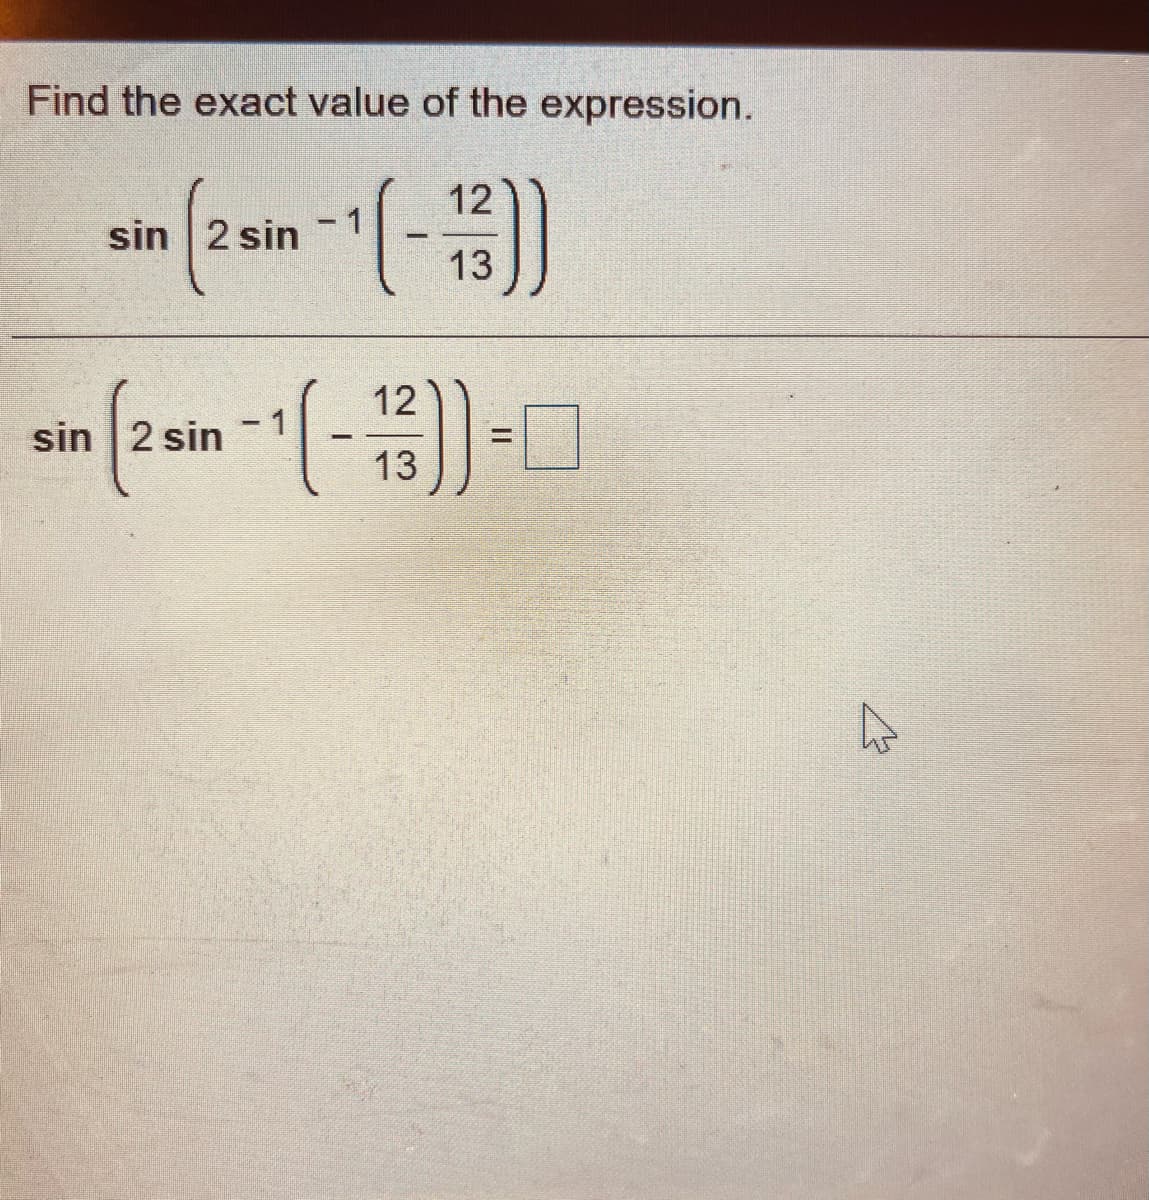 Find the exact value of the expression.
12
sin 2 sin
13
12
sin 2 sin - 1
%3D
13
